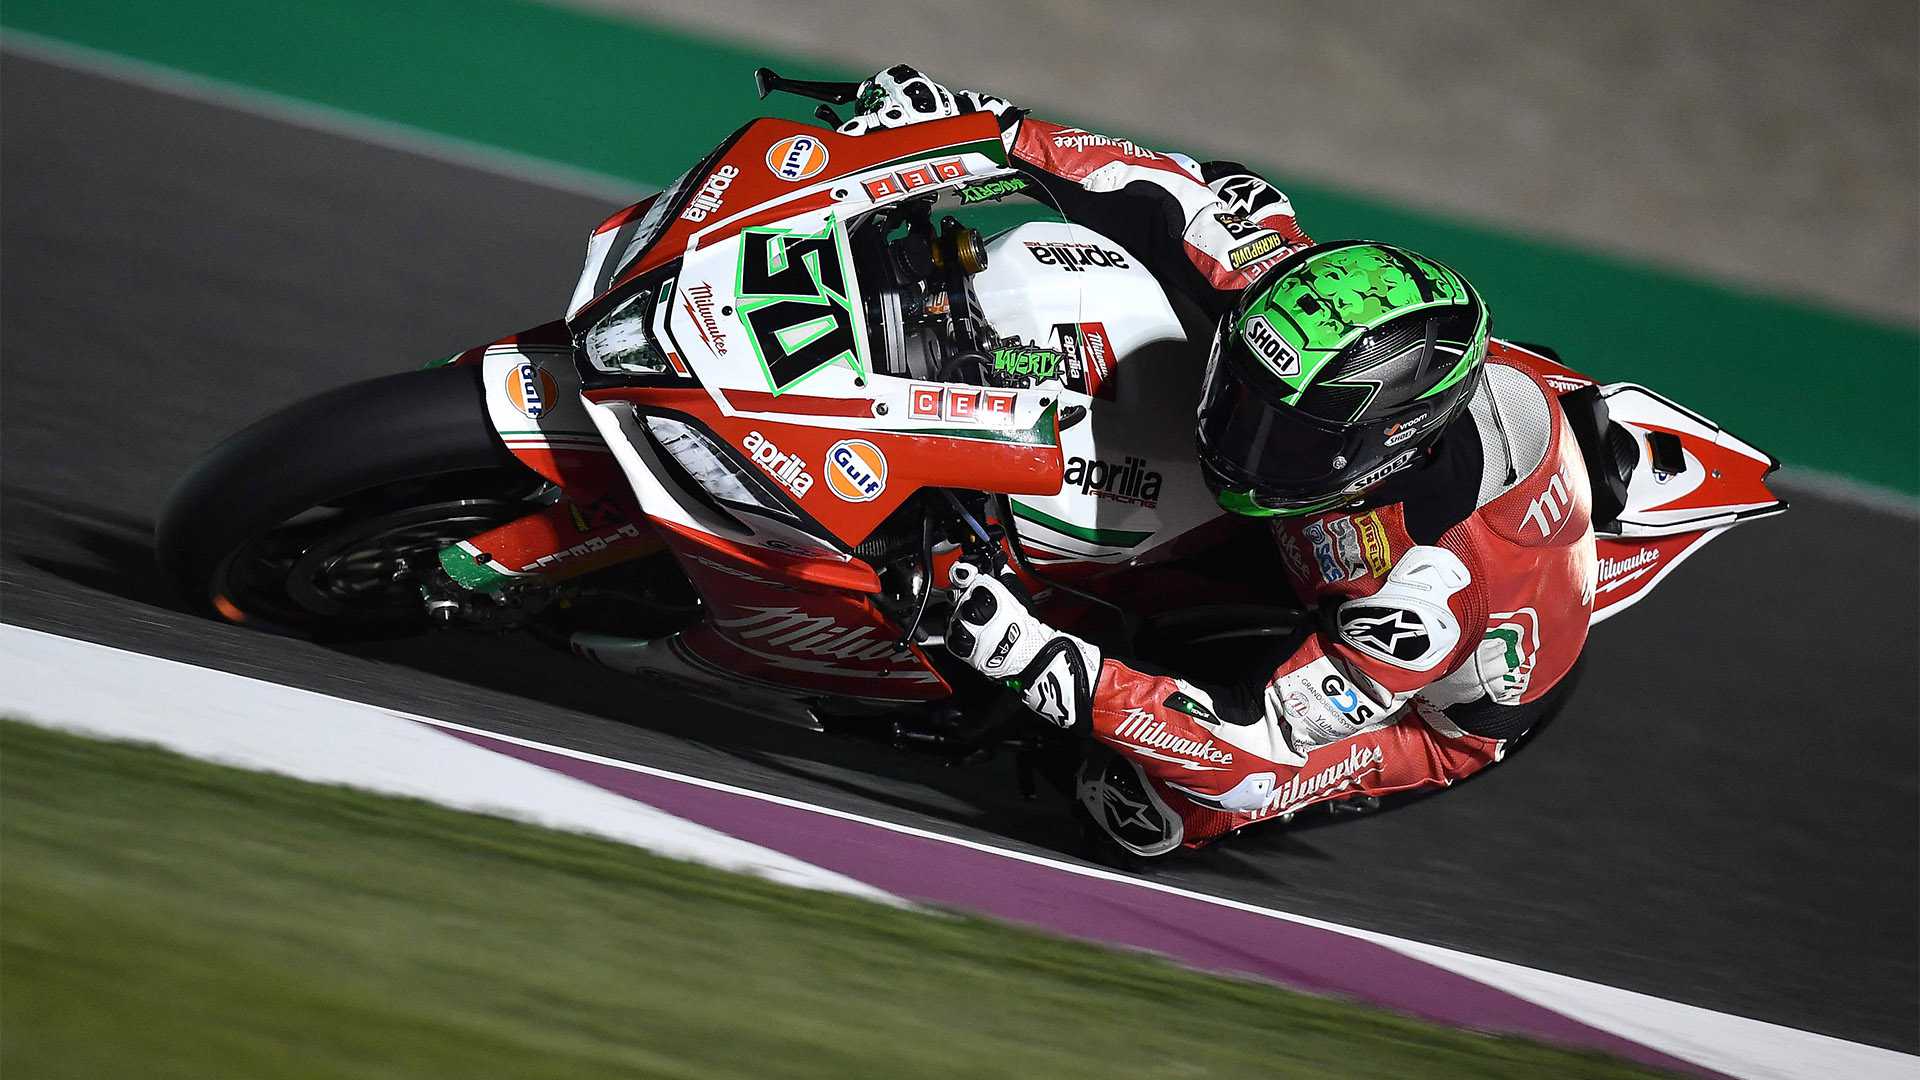 Laverty steals the spotlight in Qatar FP3